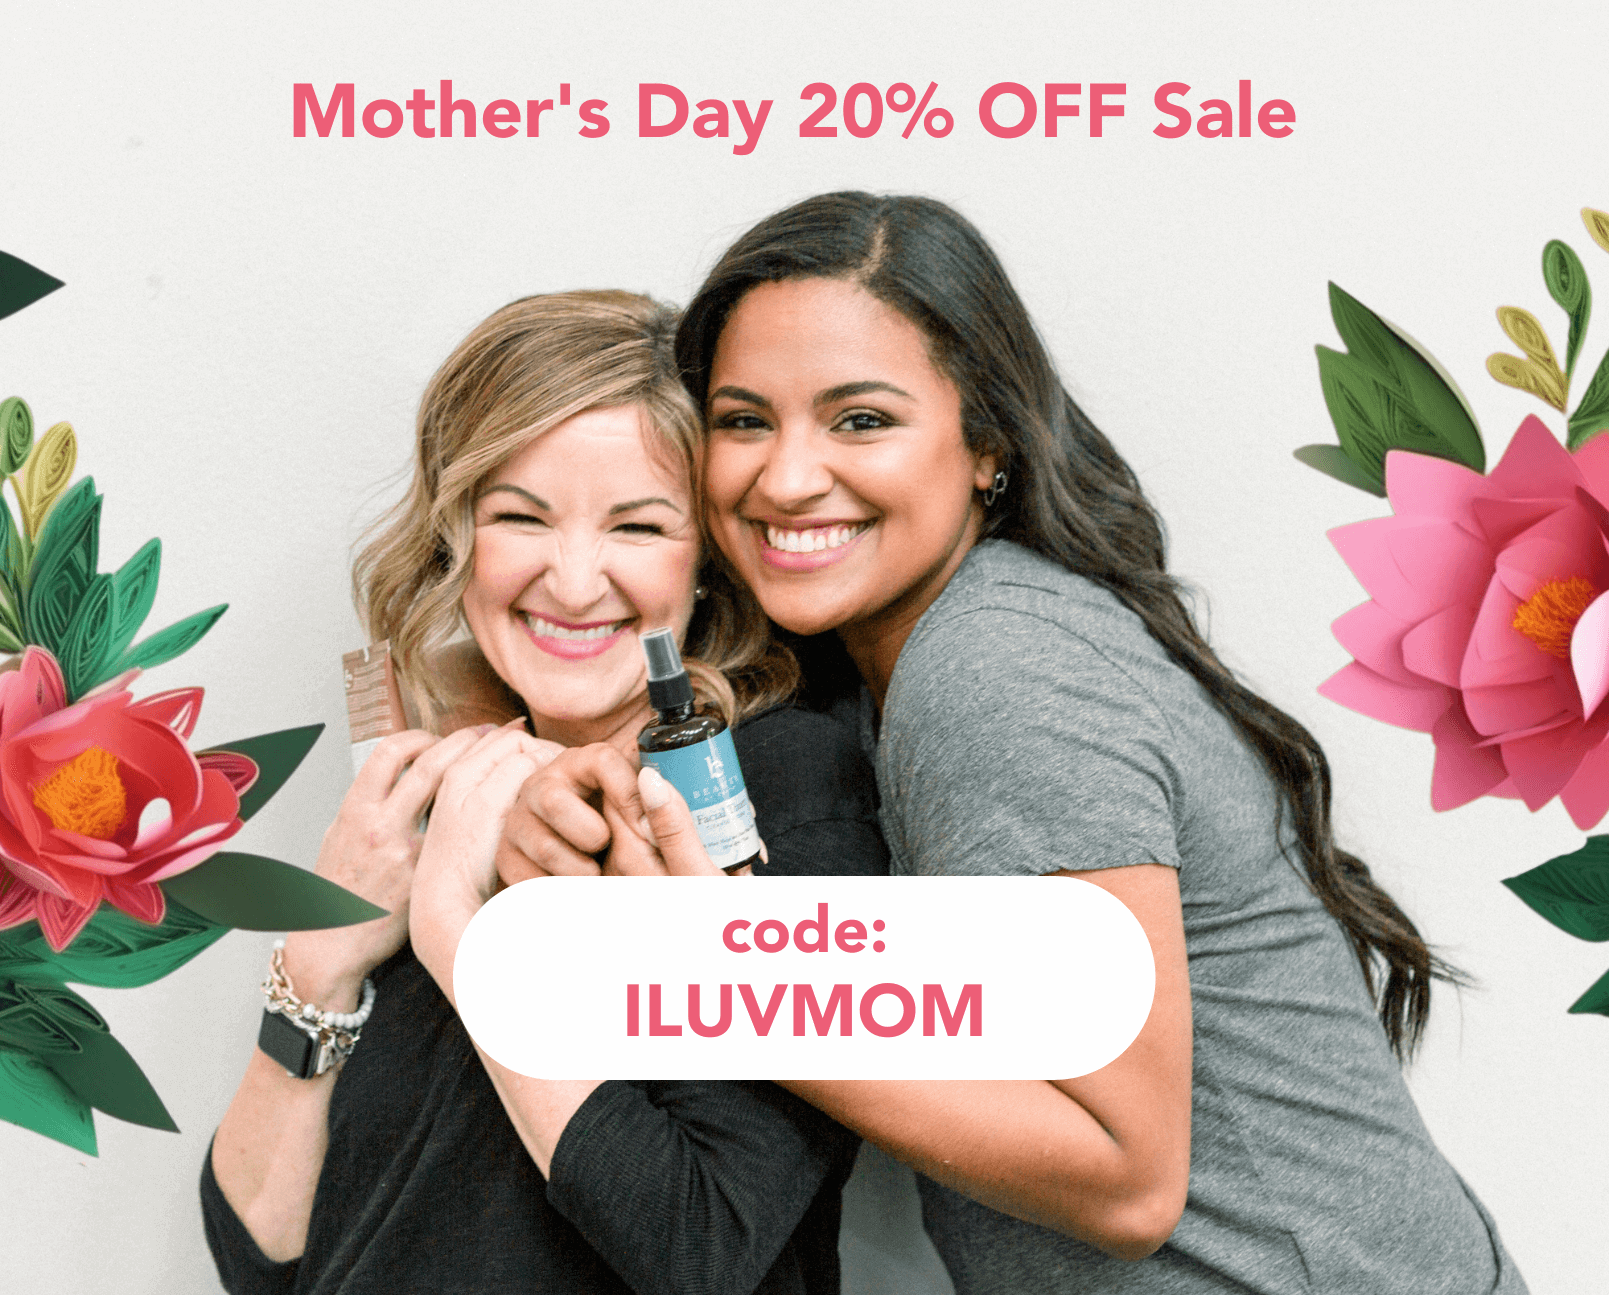 Mother's Day 20% OFF Sale! Use code ILUVMOM